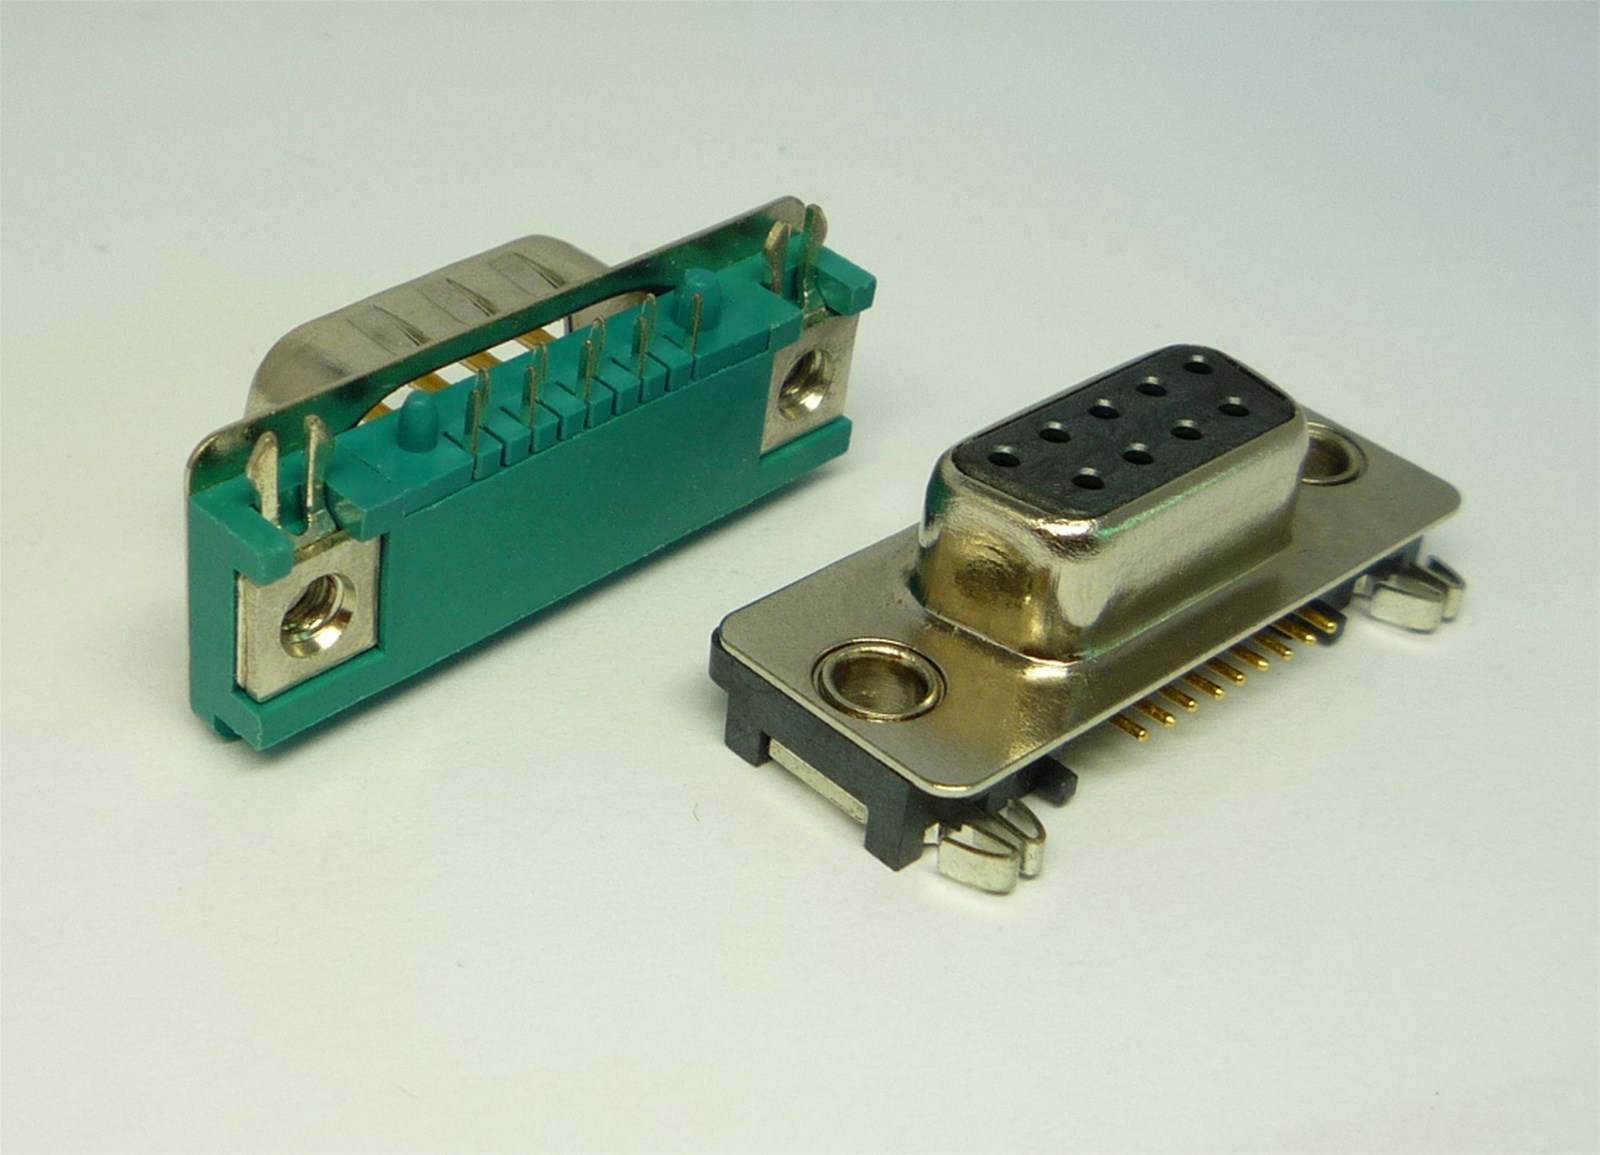 D-Sub Female, Male Connector Straight Solder